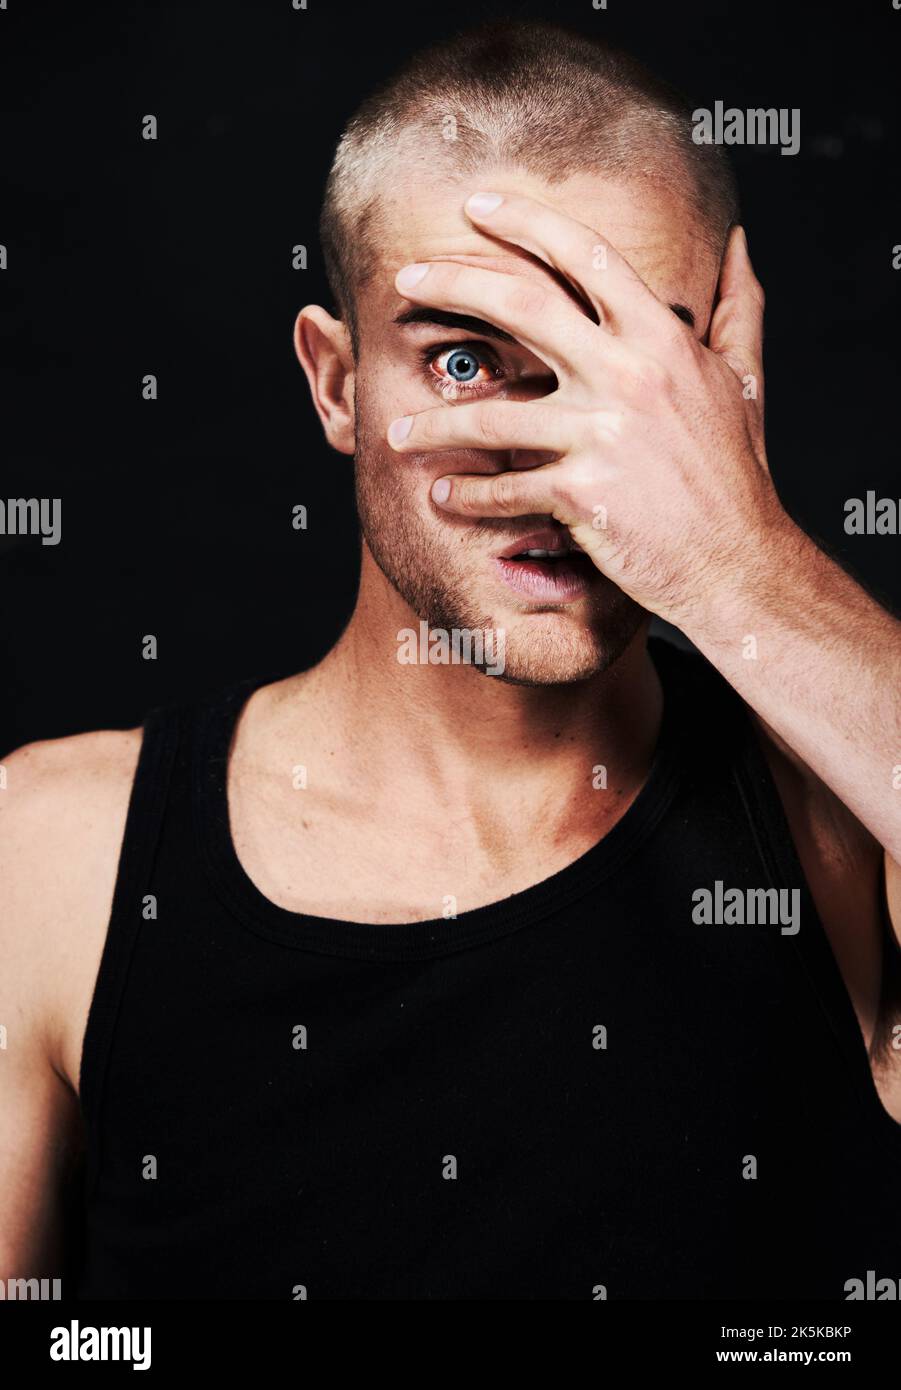 Can you see me. Portrait of a paranoid young man peeking through his fingers. Stock Photo